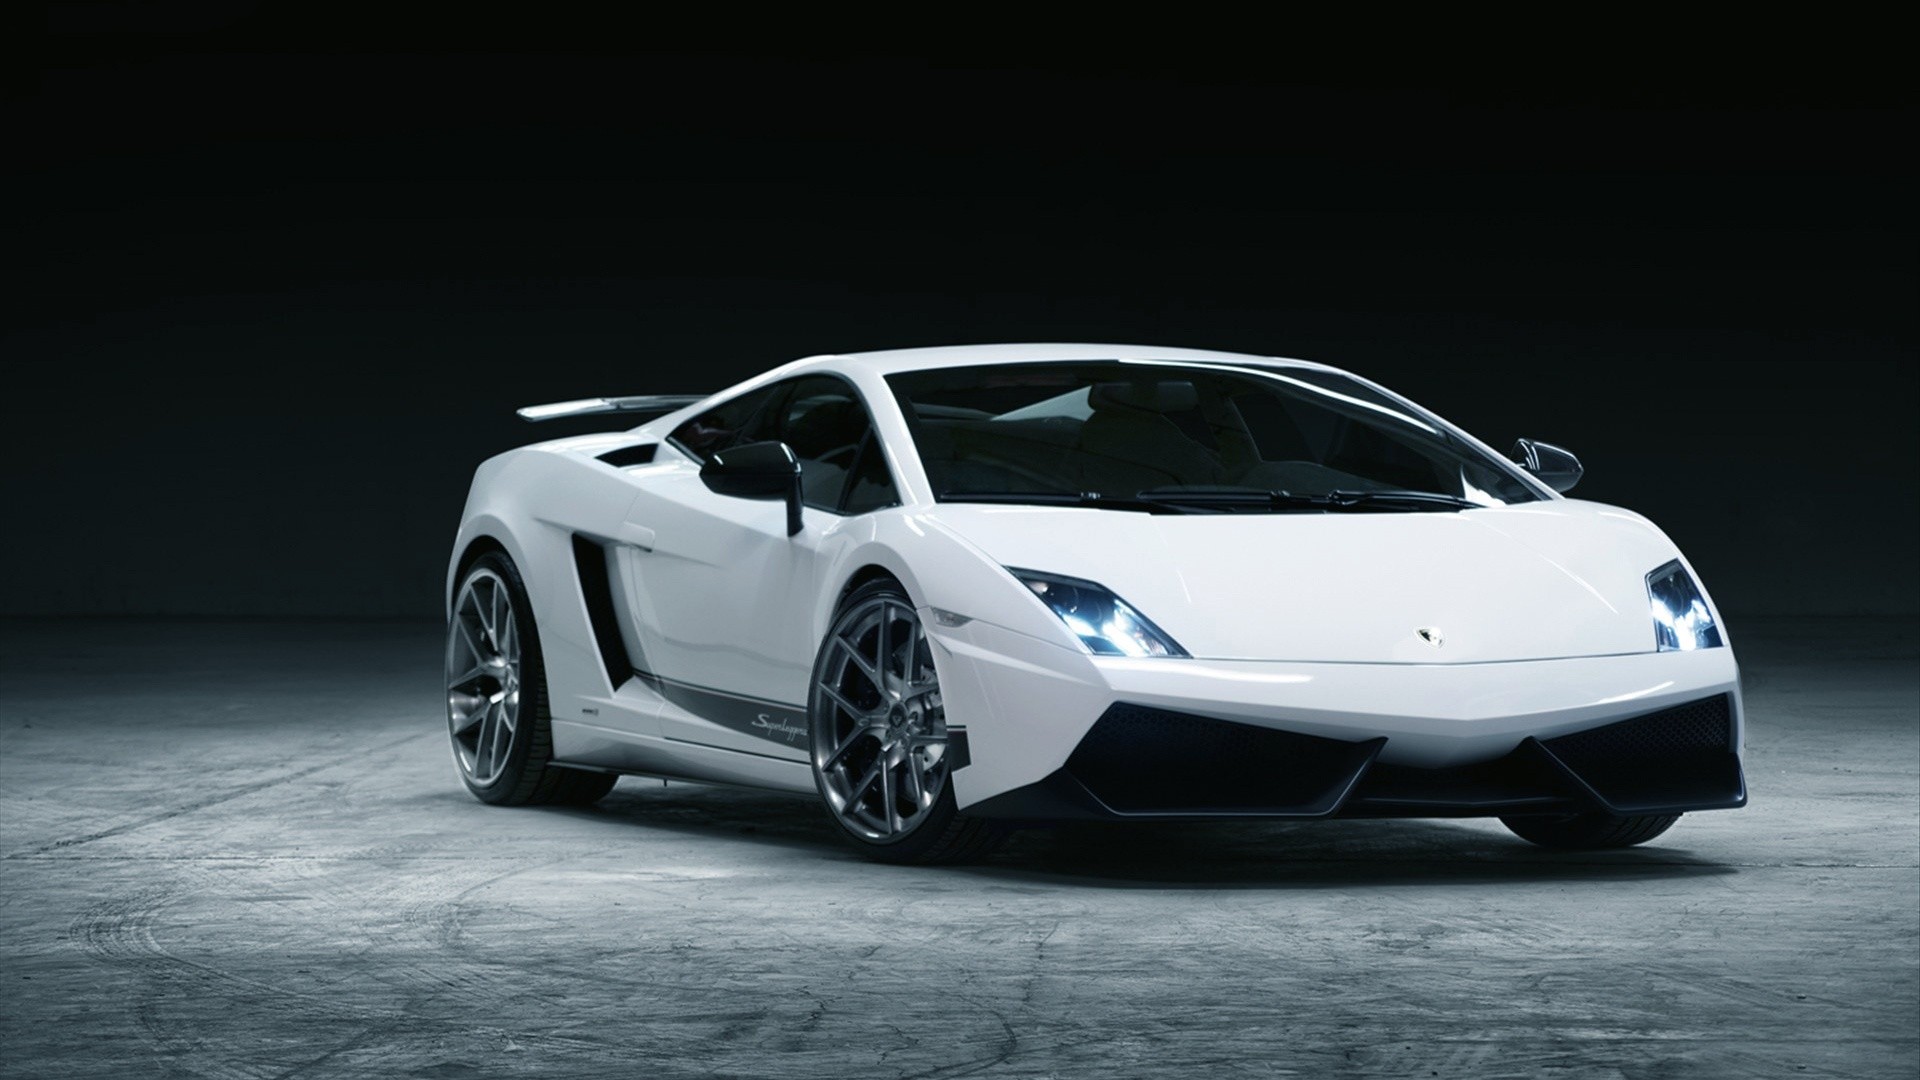 Free HD Wallpapers | Cars Wallpapers Gallery - PC ...